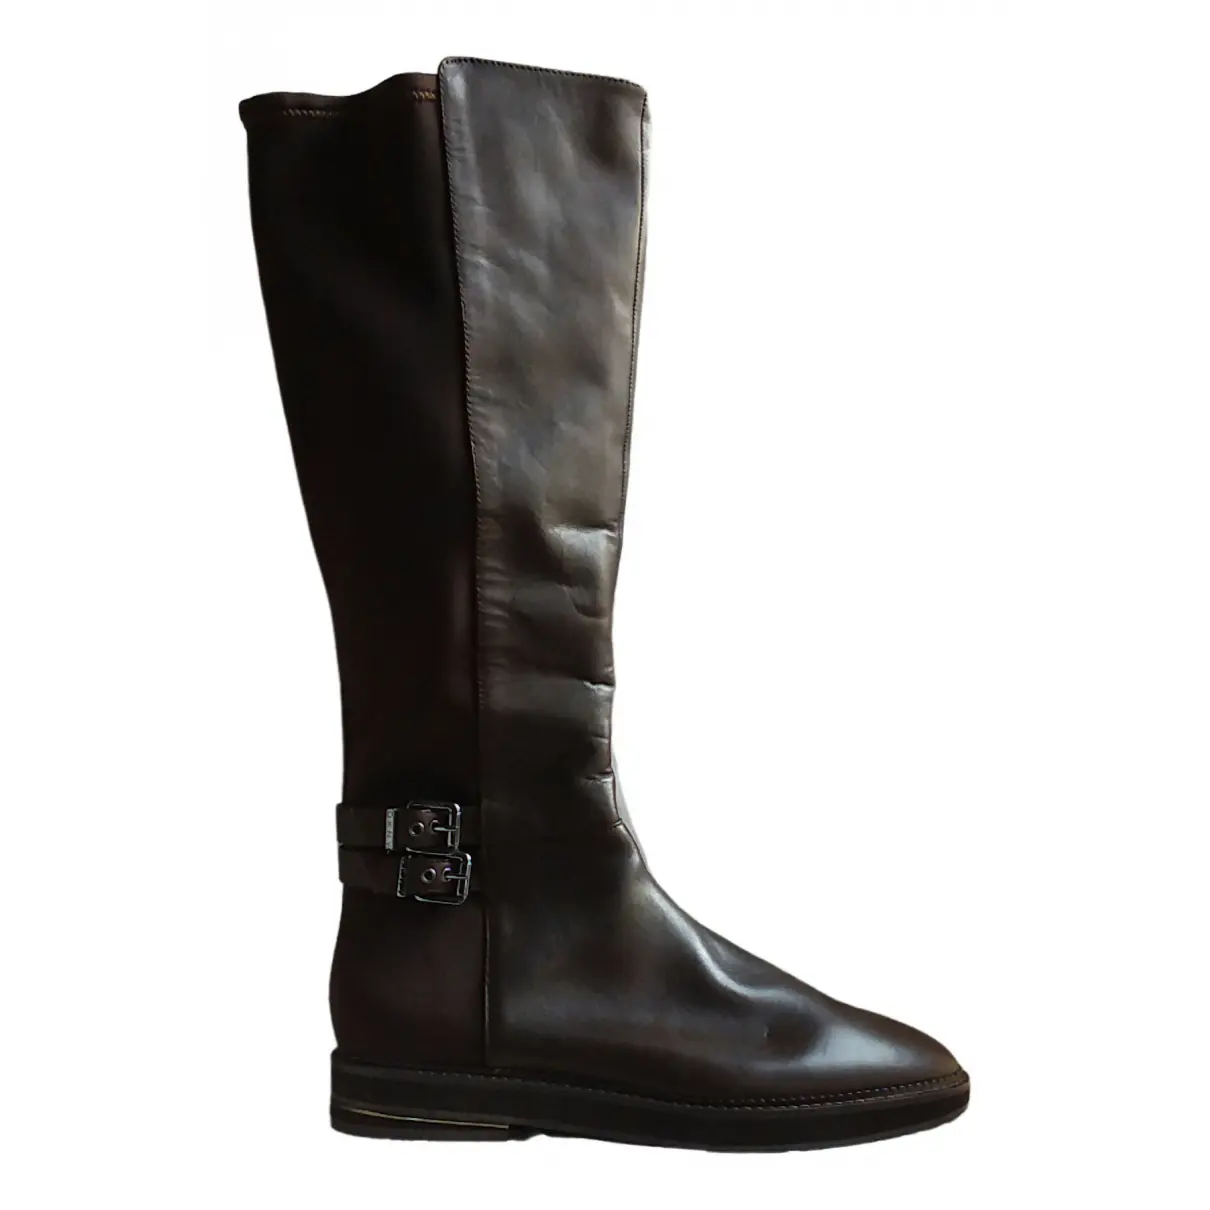 Leather riding boots Dkny